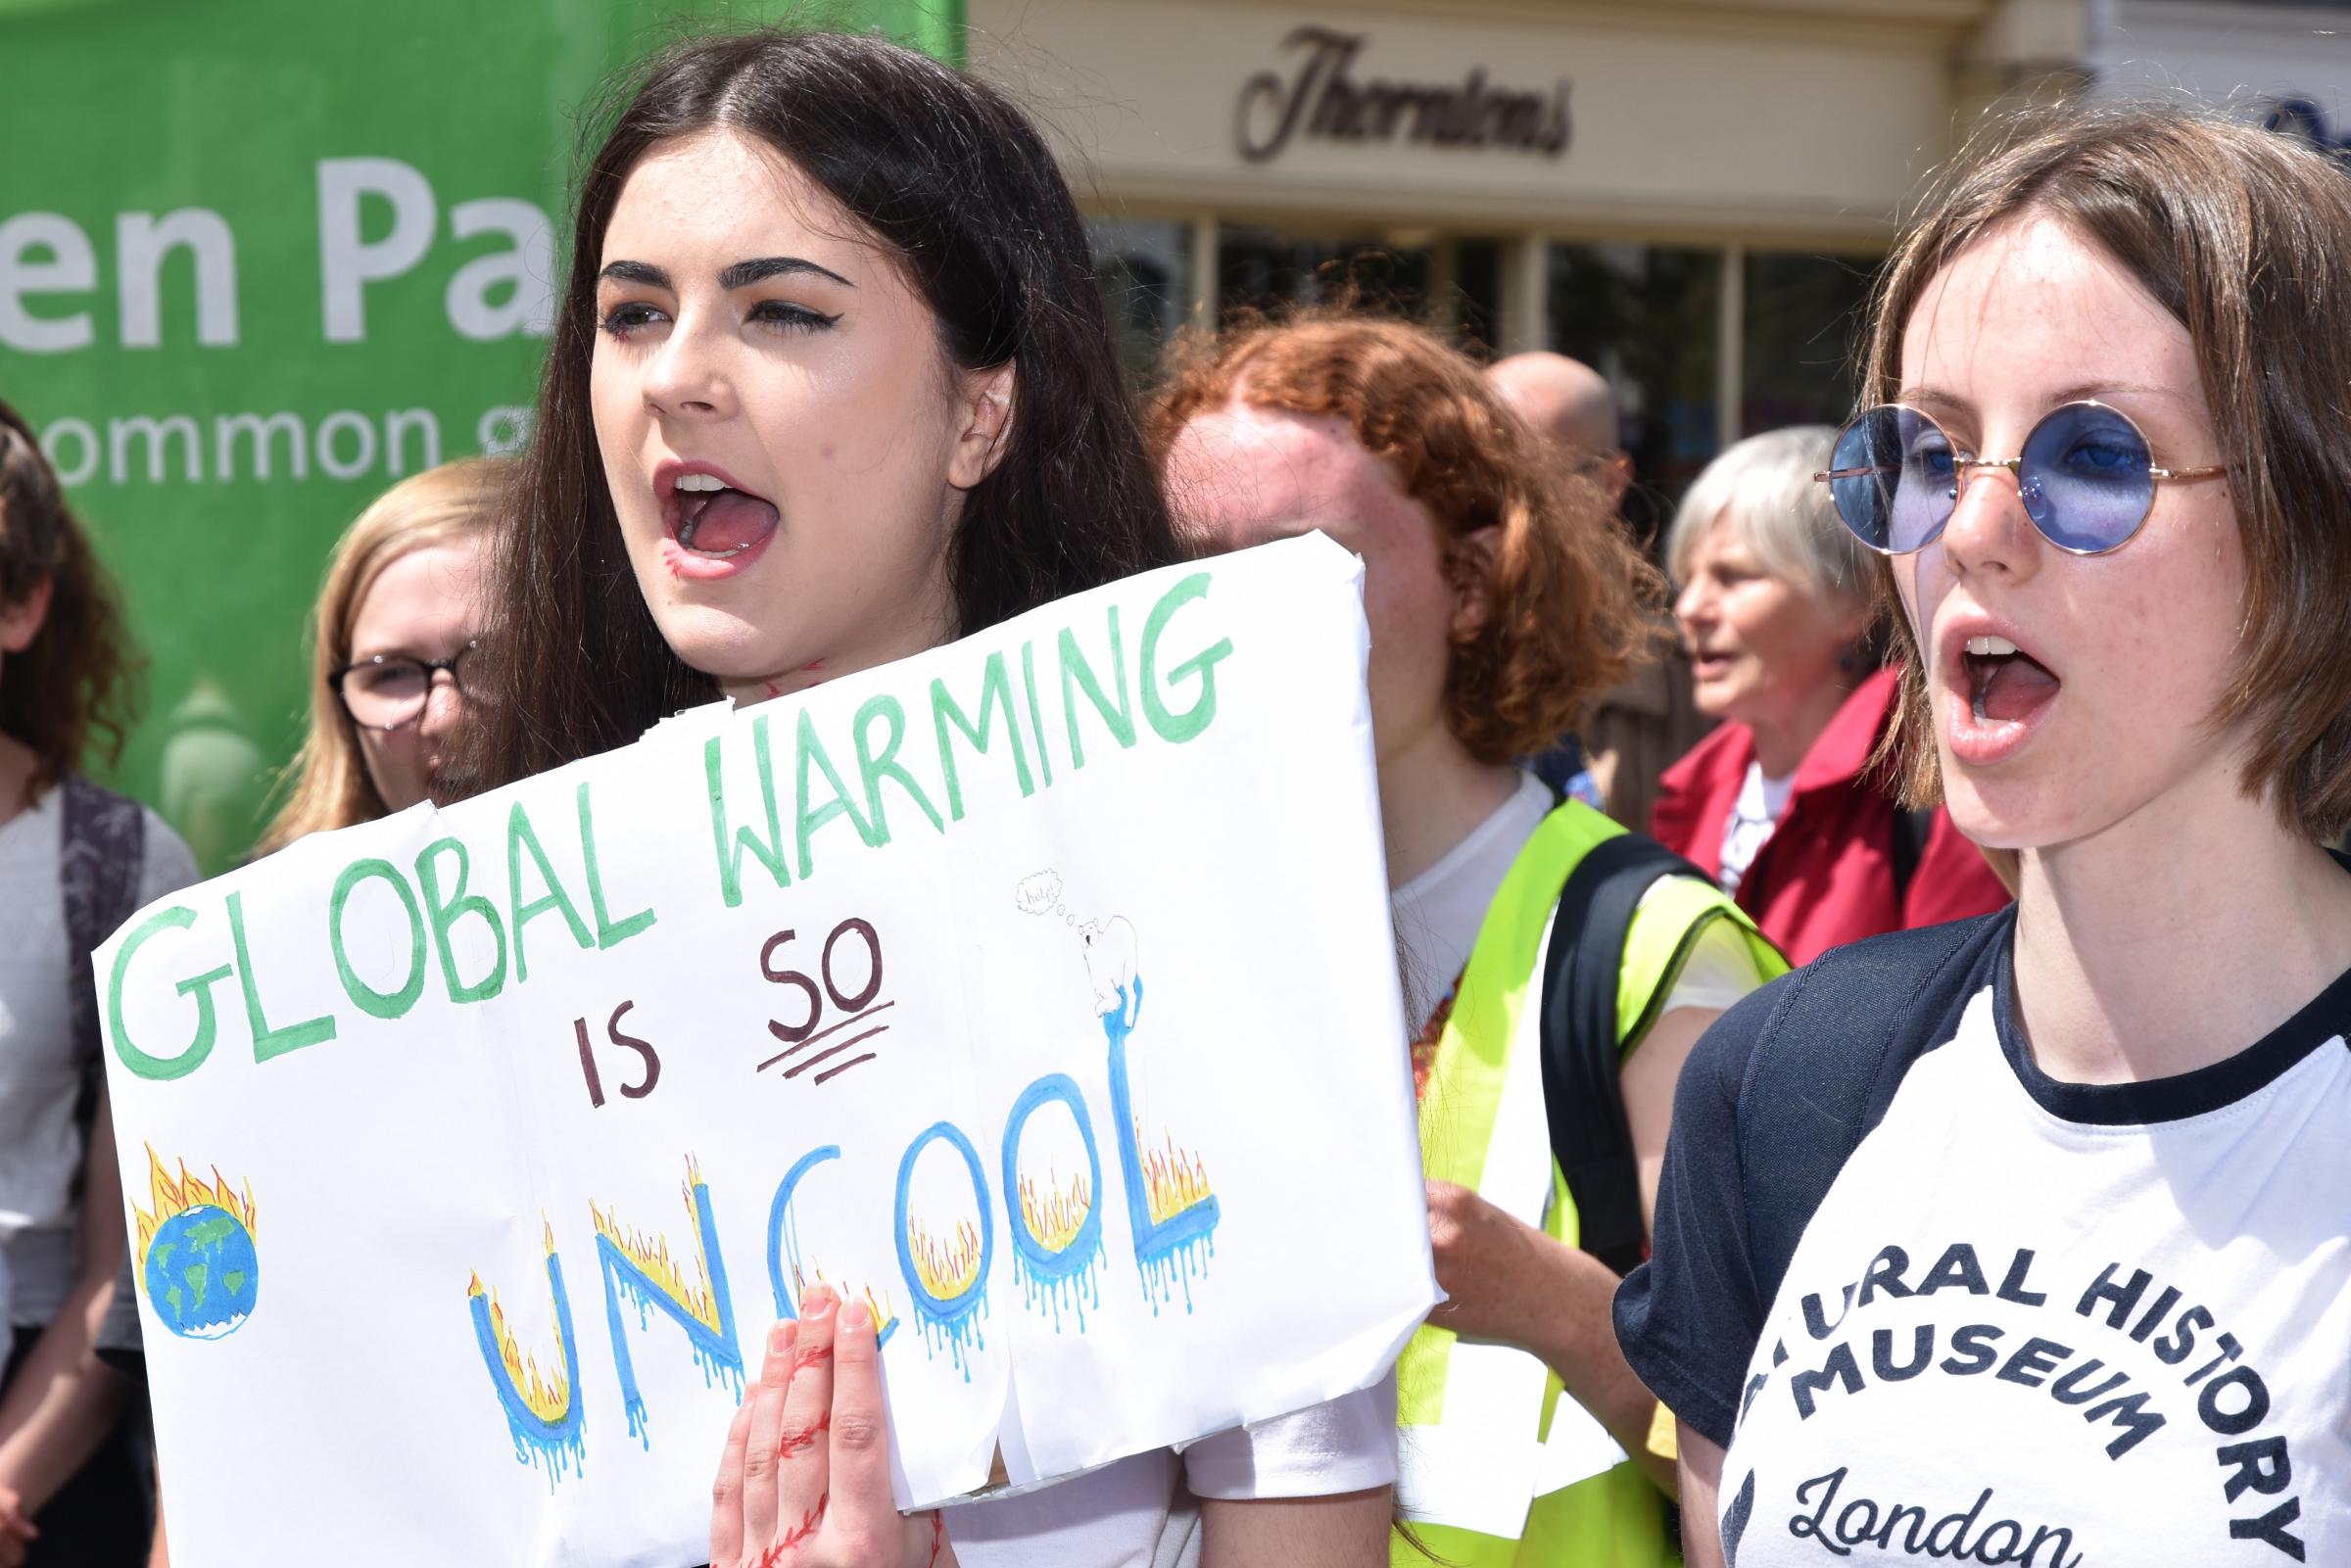 Campaigners take action over climate